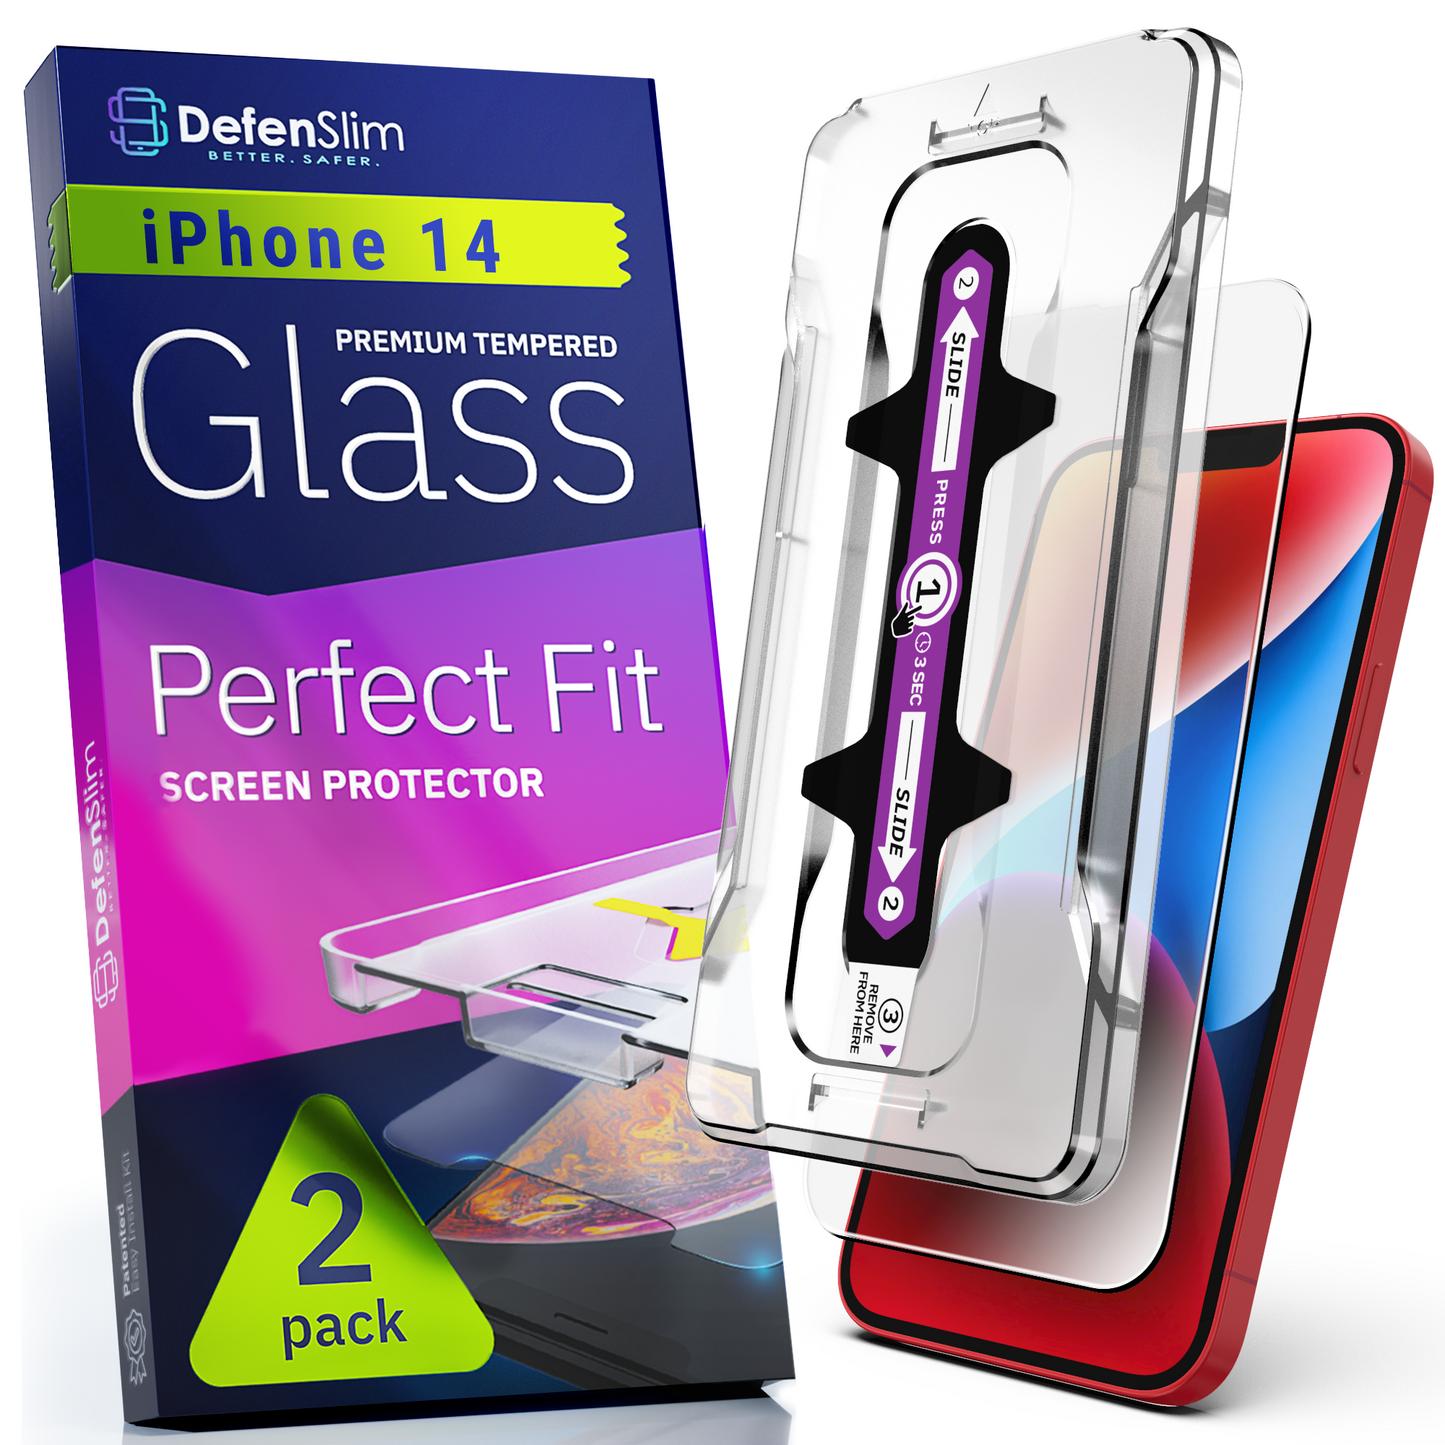 Defenslim iPhone 14 Screen Protector [2-Pack] with Easy Auto-Align Install Kit